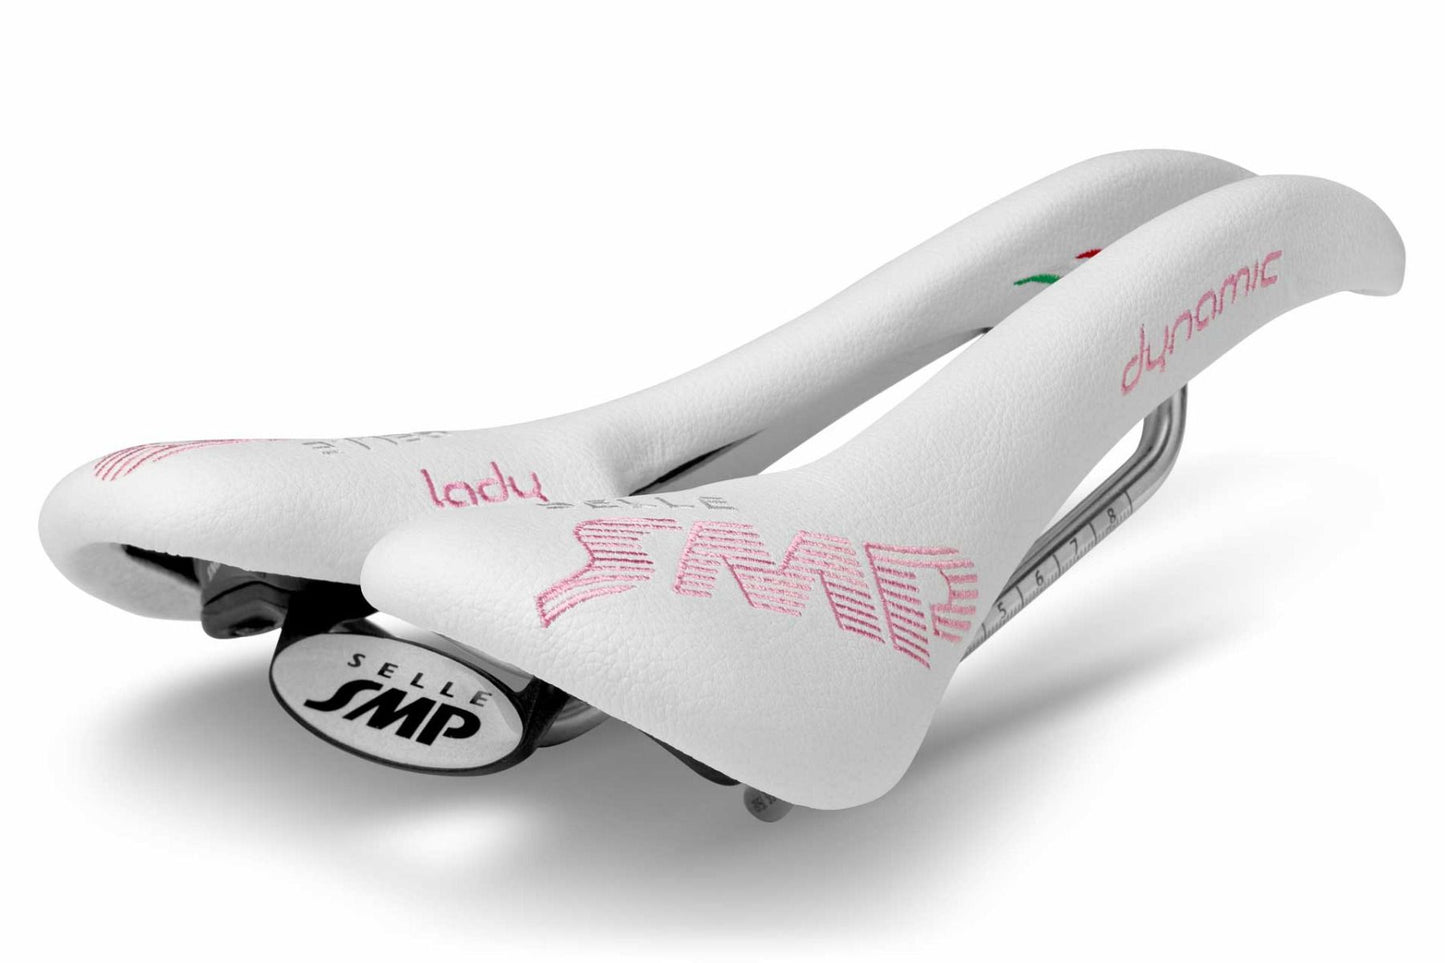 Selle SMP Dynamic Saddle with Steel Rails (Lady White)